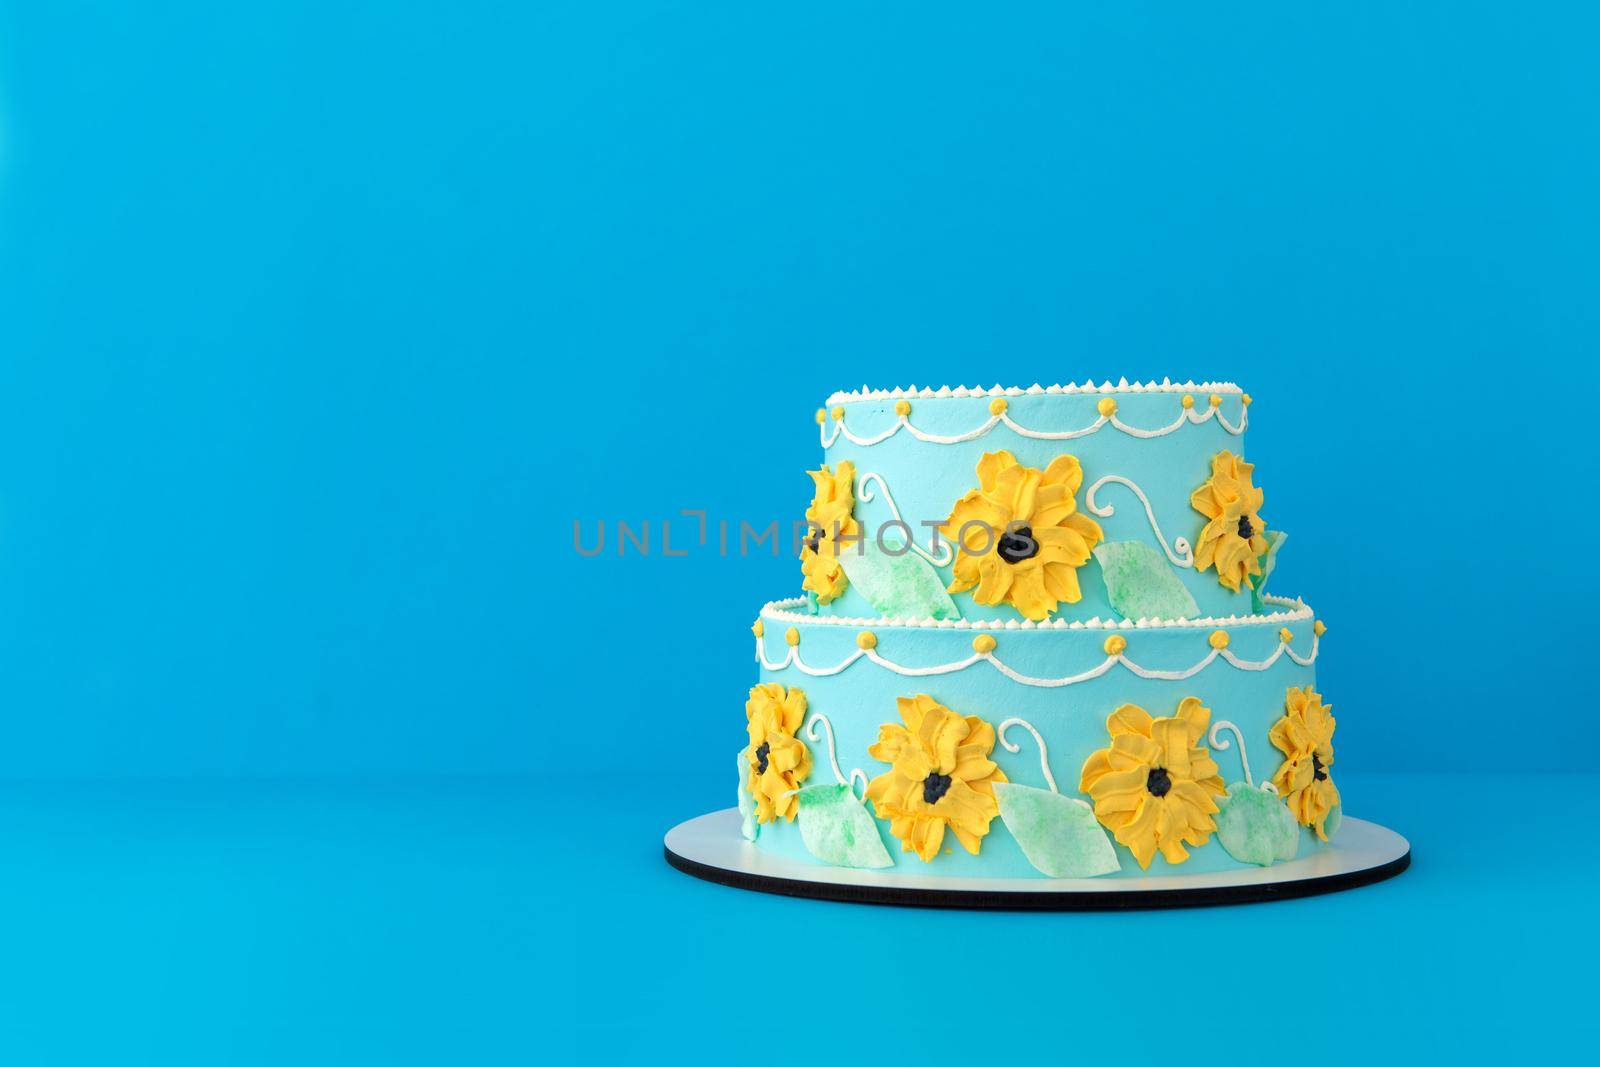 Colorful tiered festive birthday cake decorated with yellow flowers and green leaves made of cream on bright blue background